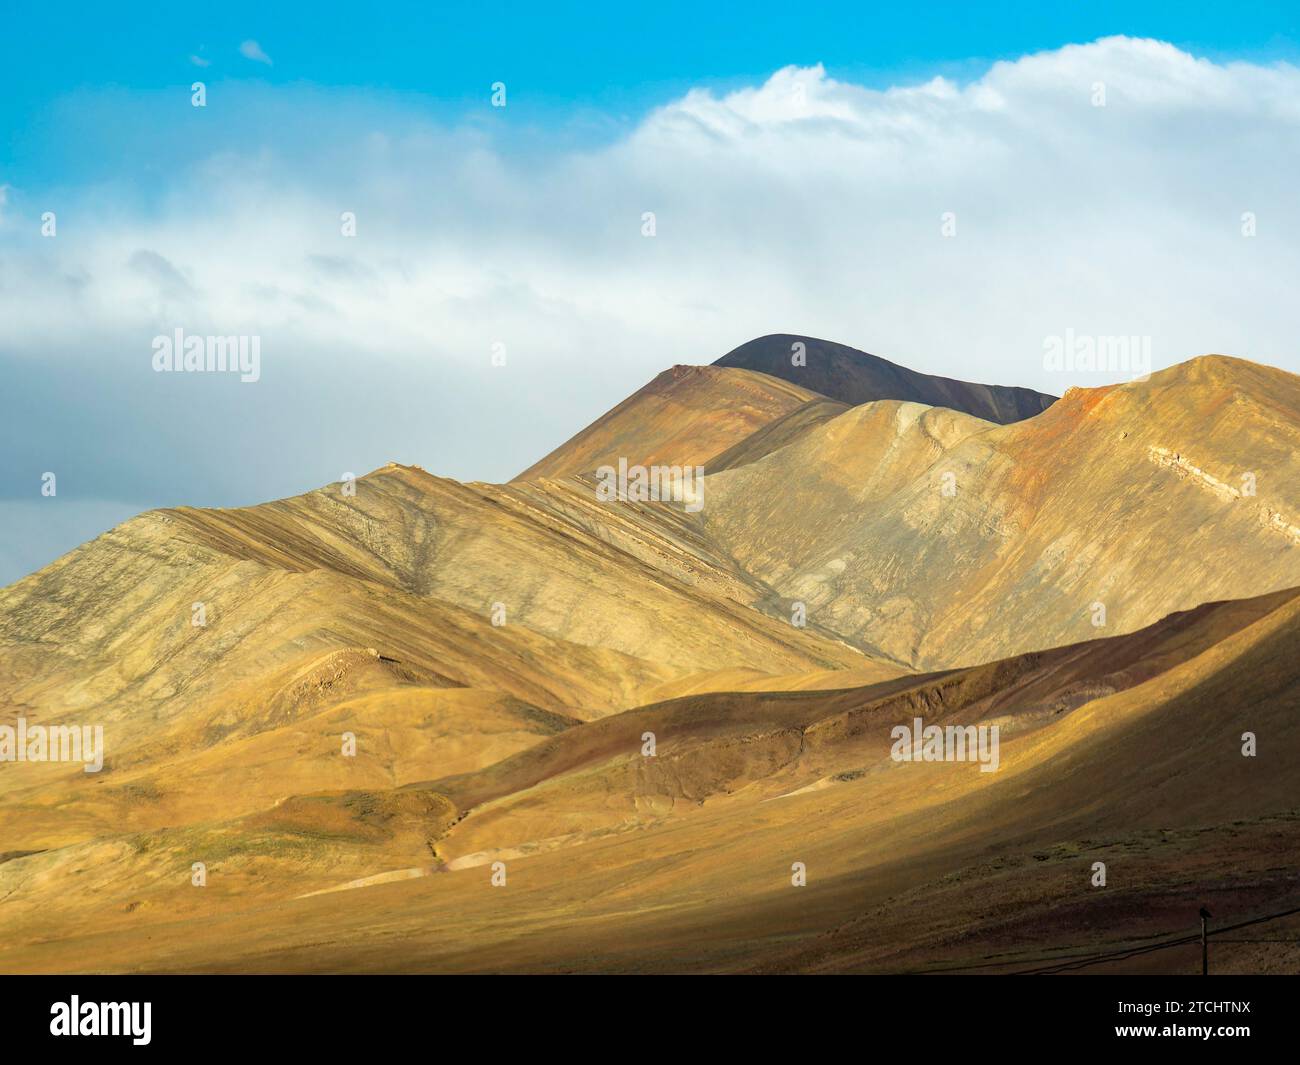 Mountain landscape with yellow mountains in the highlands of Tibet, China Stock Photo